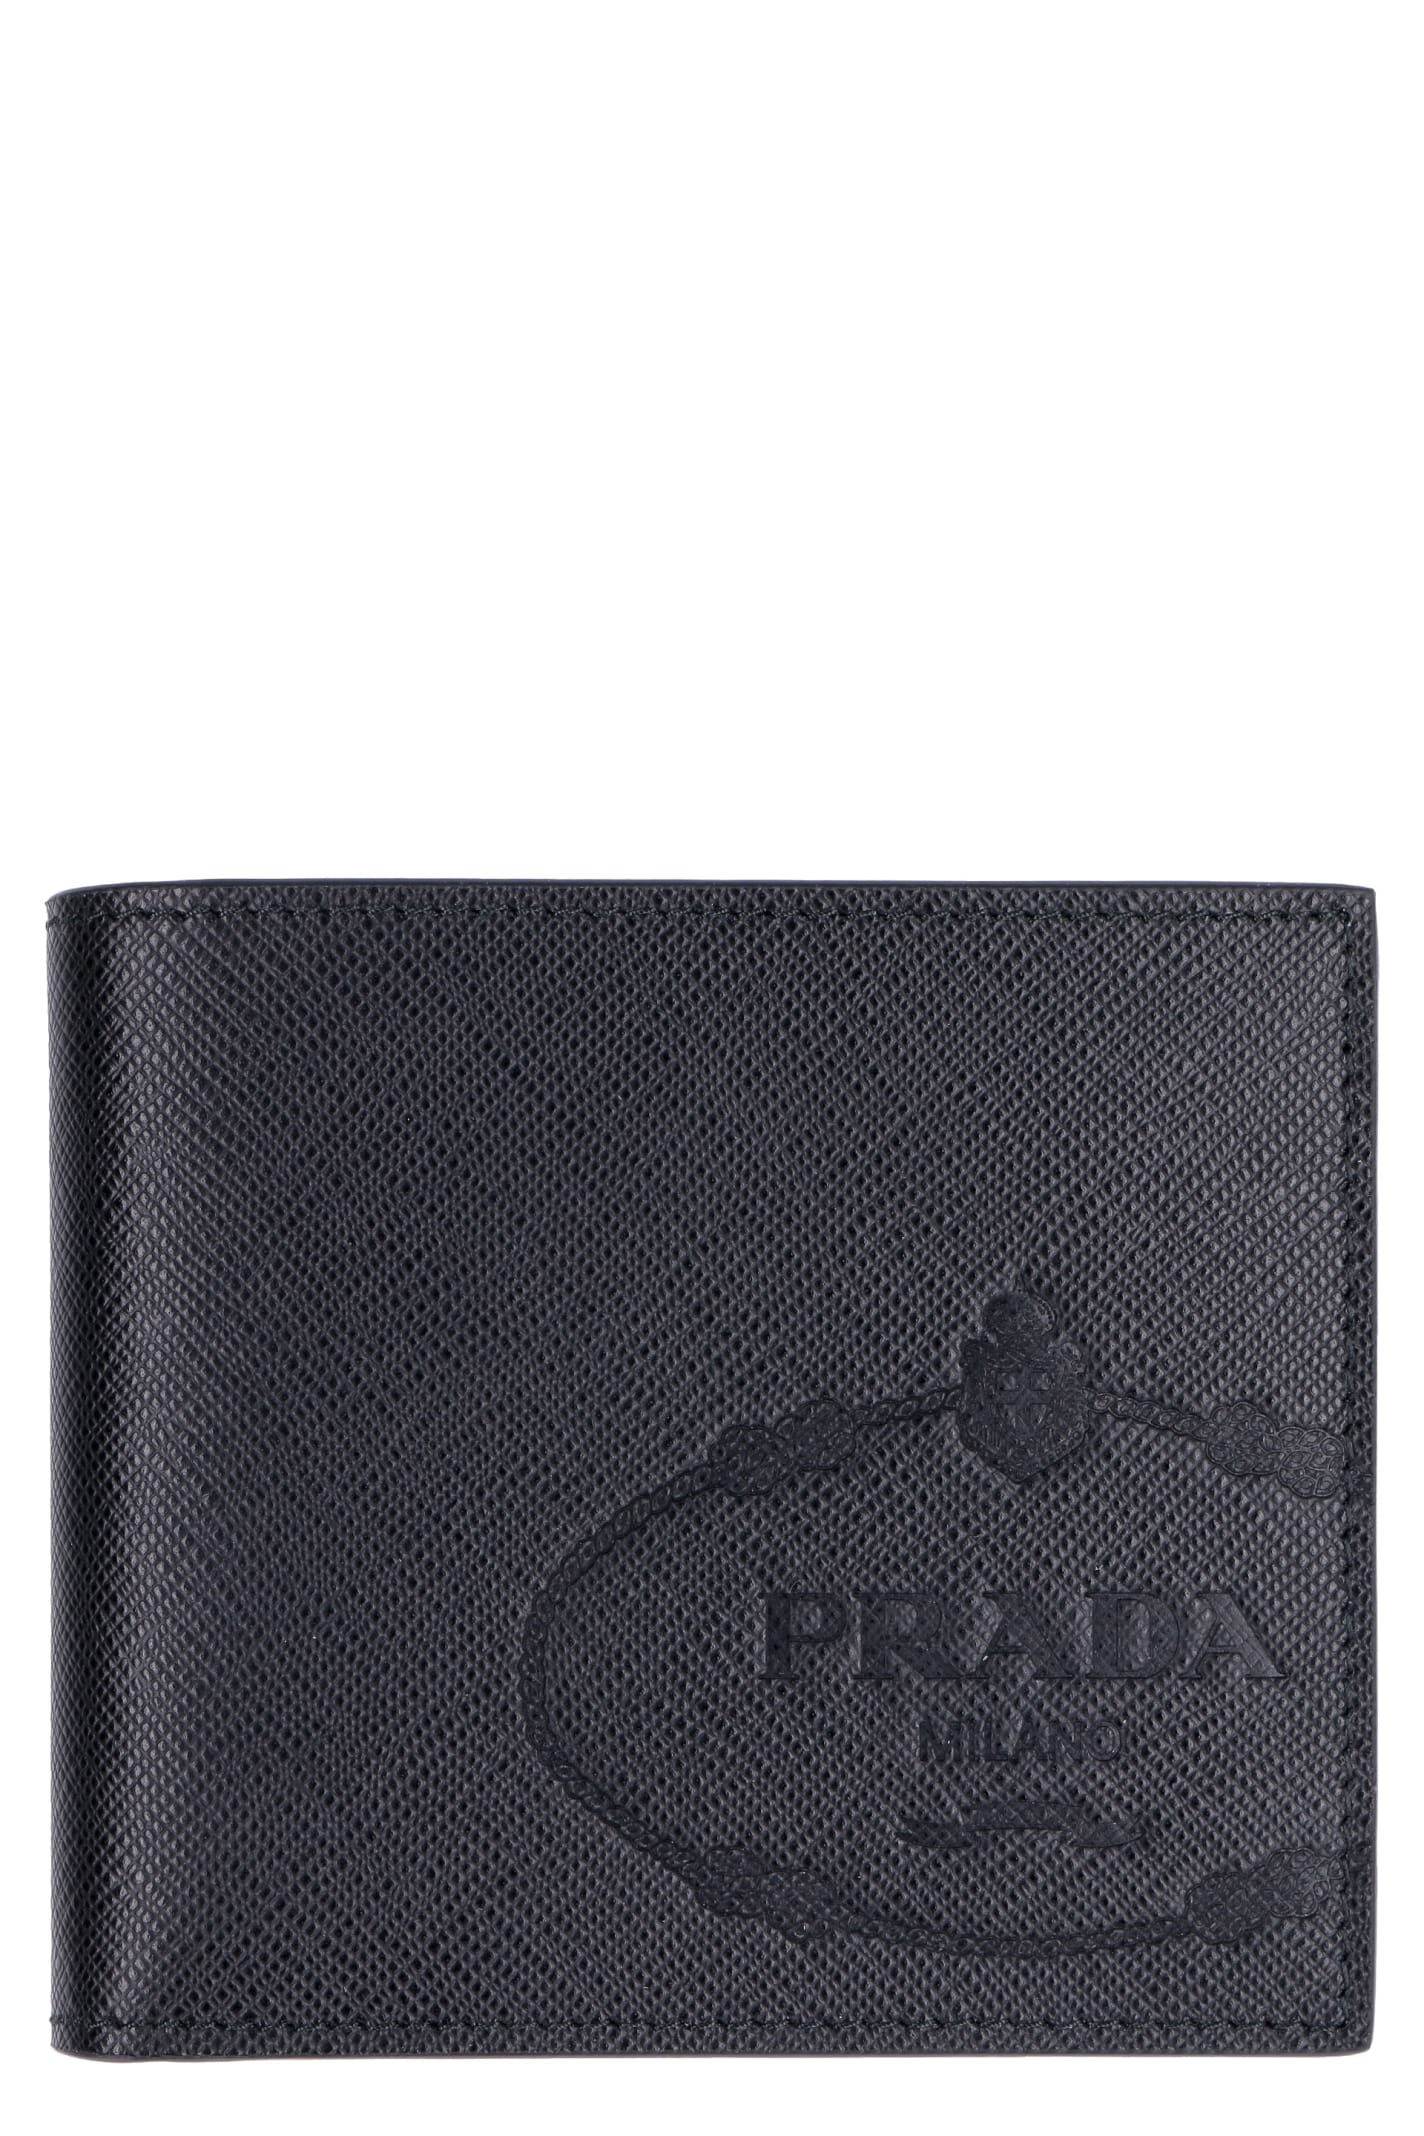 PRADA LEATHER FLAP-OVER WALLET,11264449